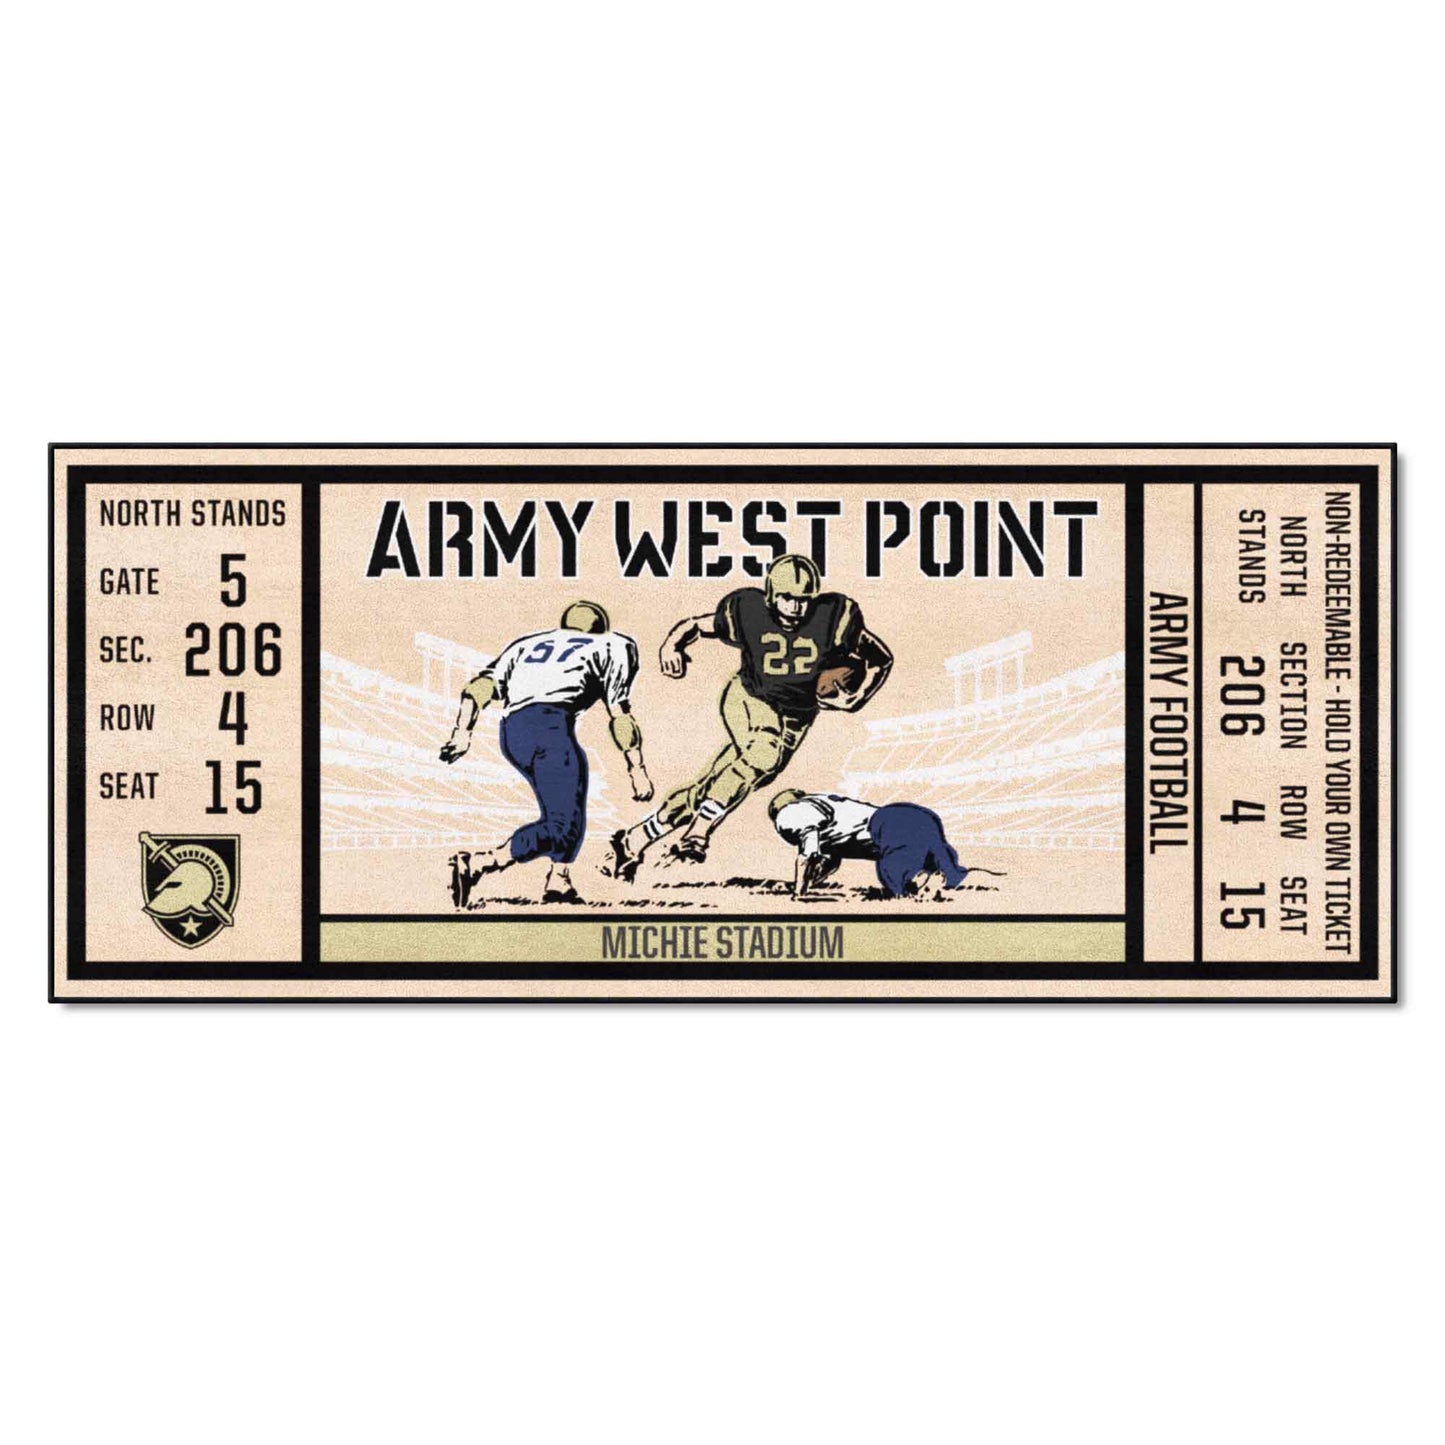 Army West Point Black Knights Ticket Runner Mat / Rug by Fanmats